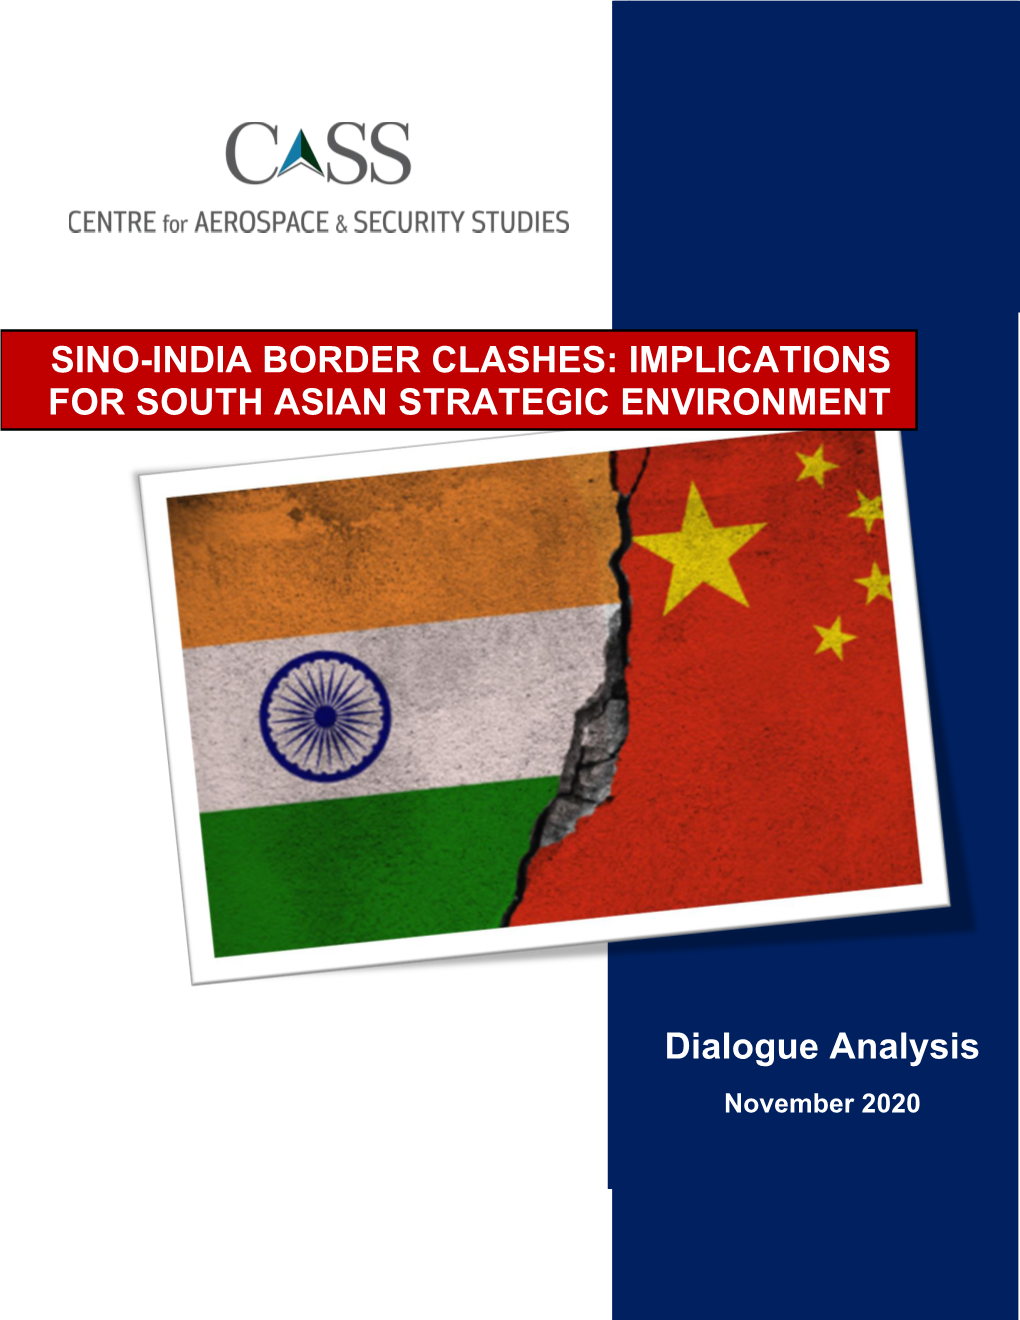 Sino-India Border Clashes: Implications for South Asian Strategic Environment